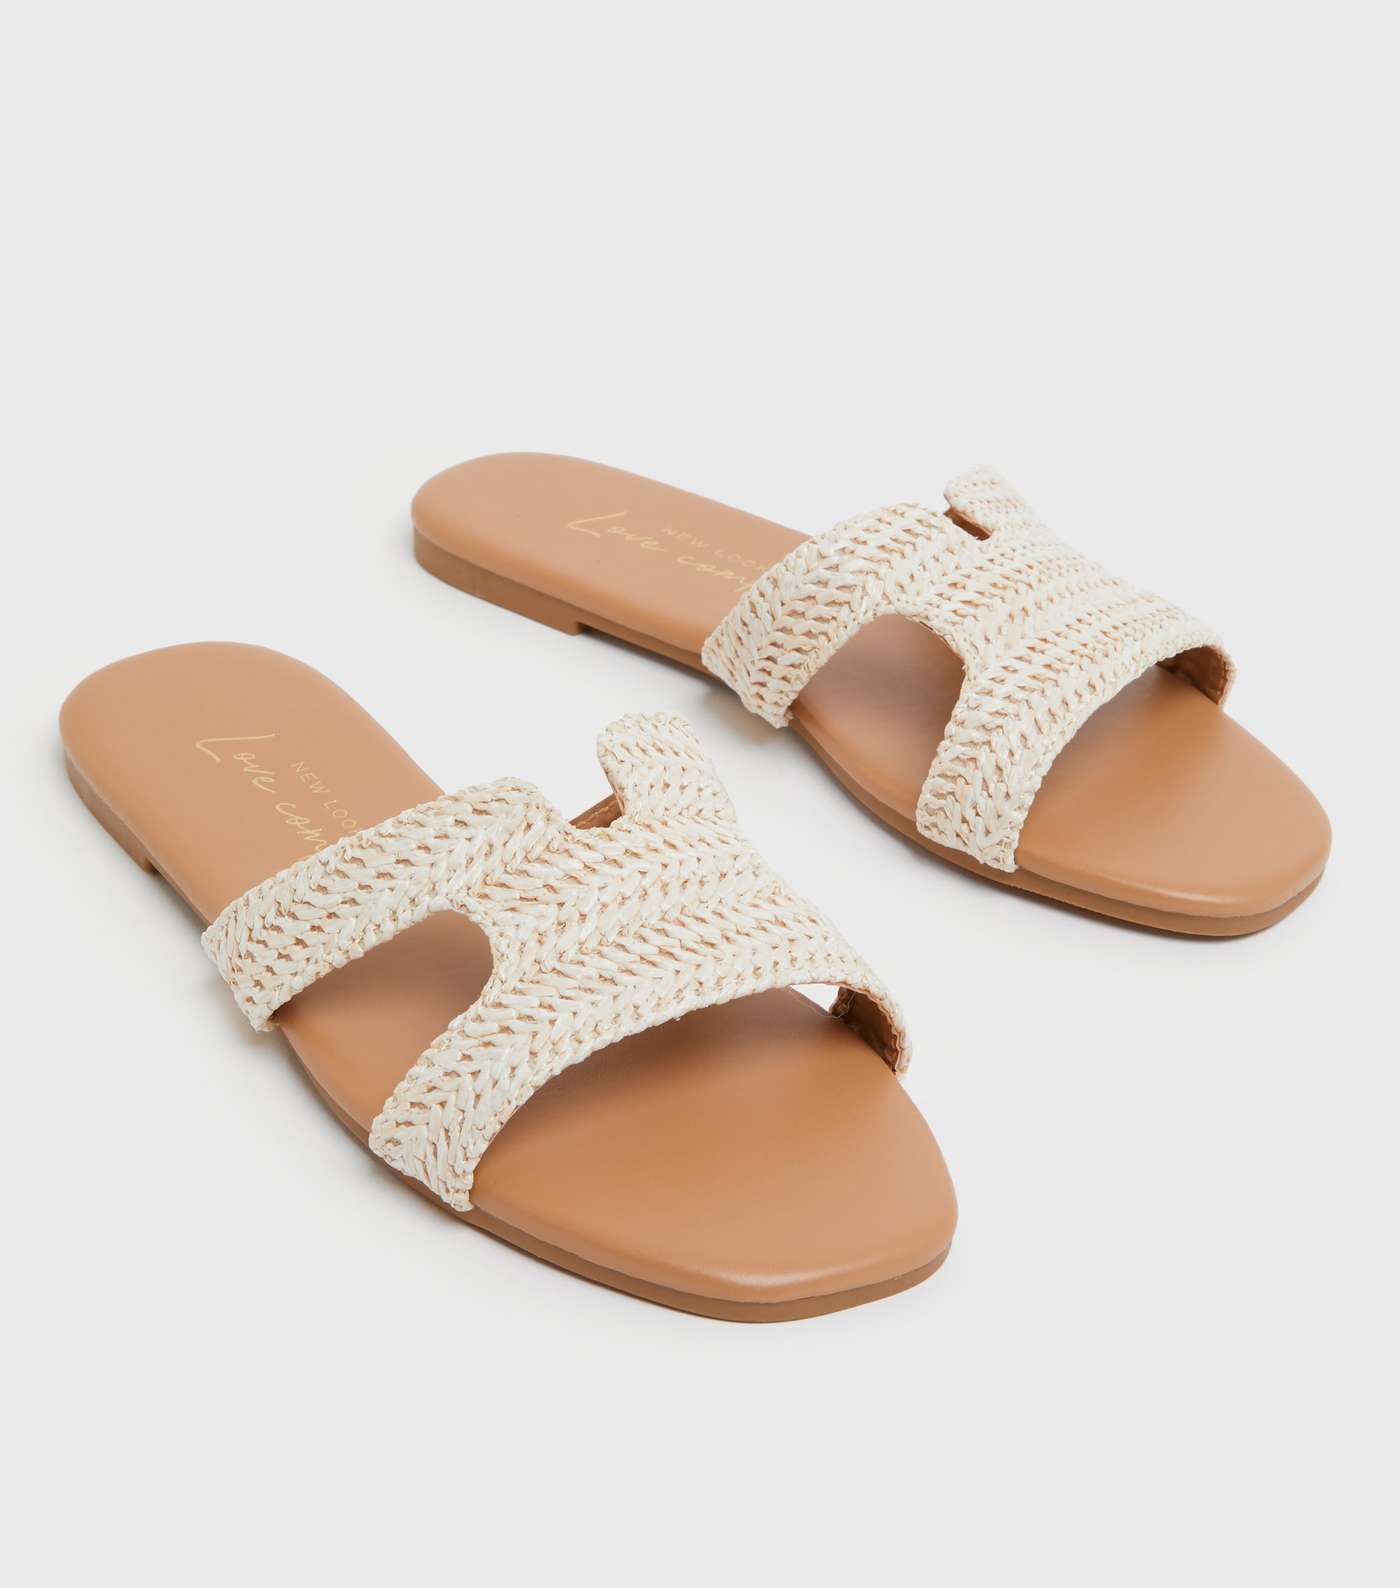 Off White Woven Cut Out Sliders Image 3